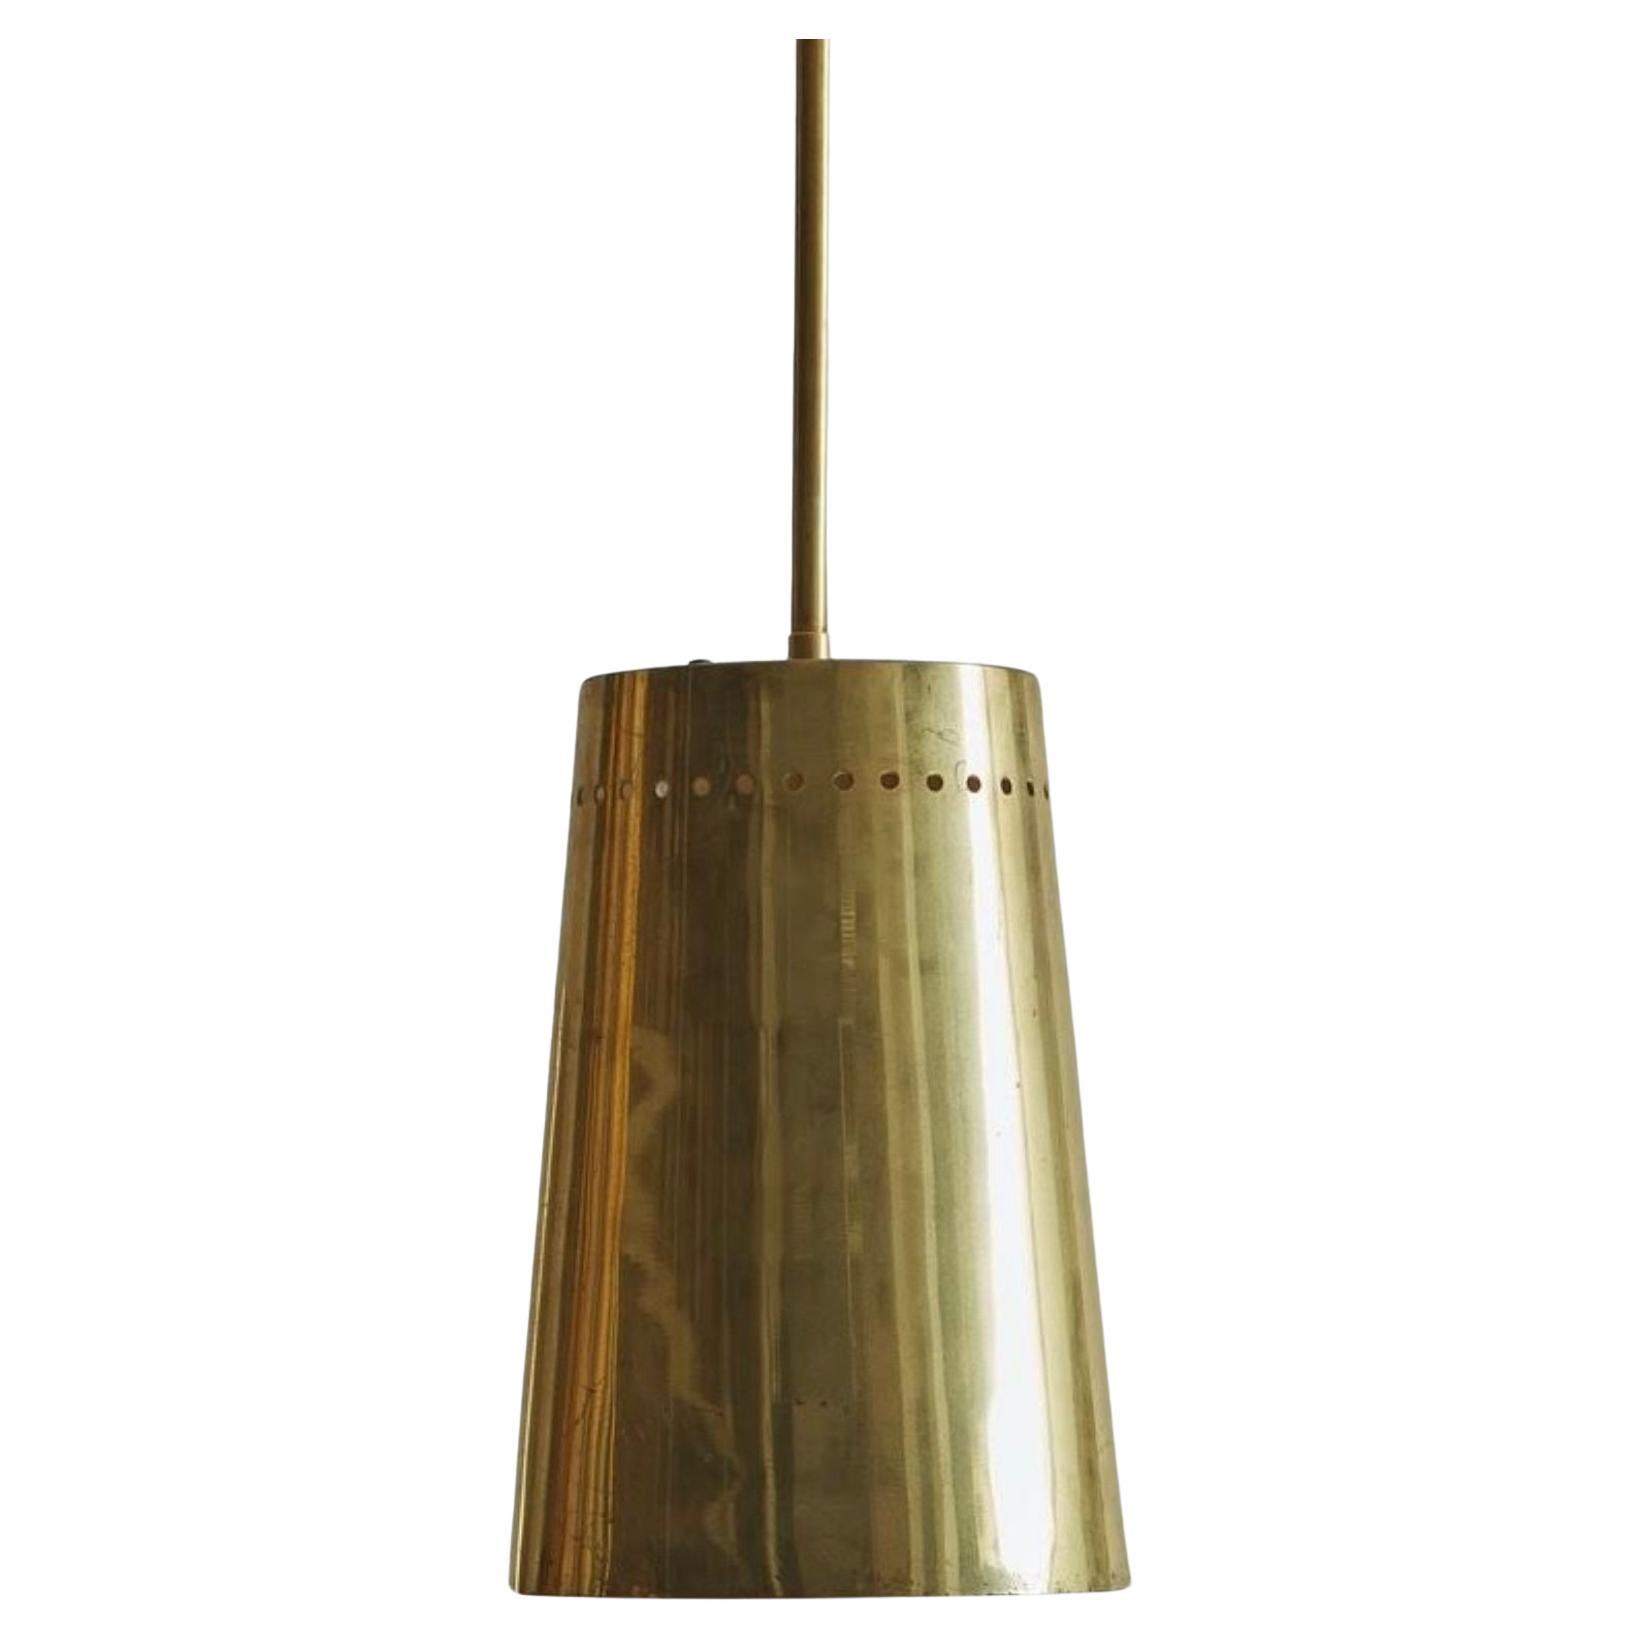 Vintage Brass Pendant Light with Perforated Trim - 2 Available For Sale